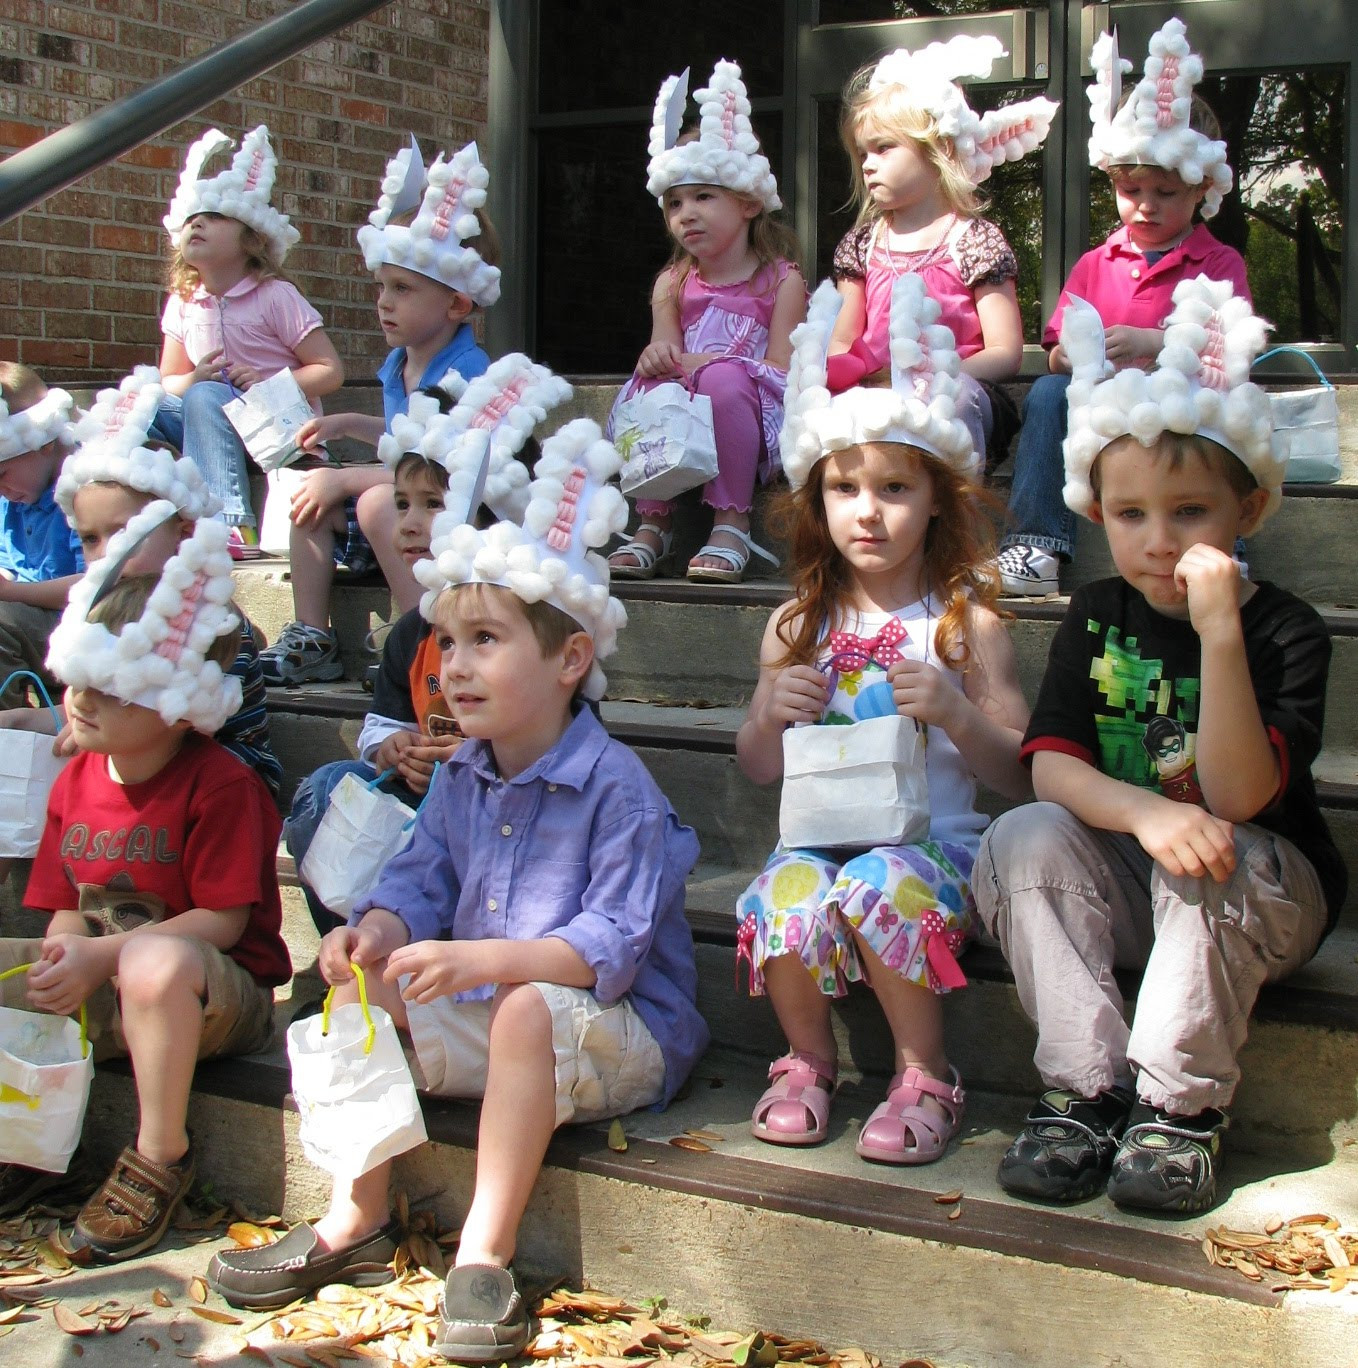 School Easter Party Ideas
 The Maxwell House Lily s Preschool Easter Party